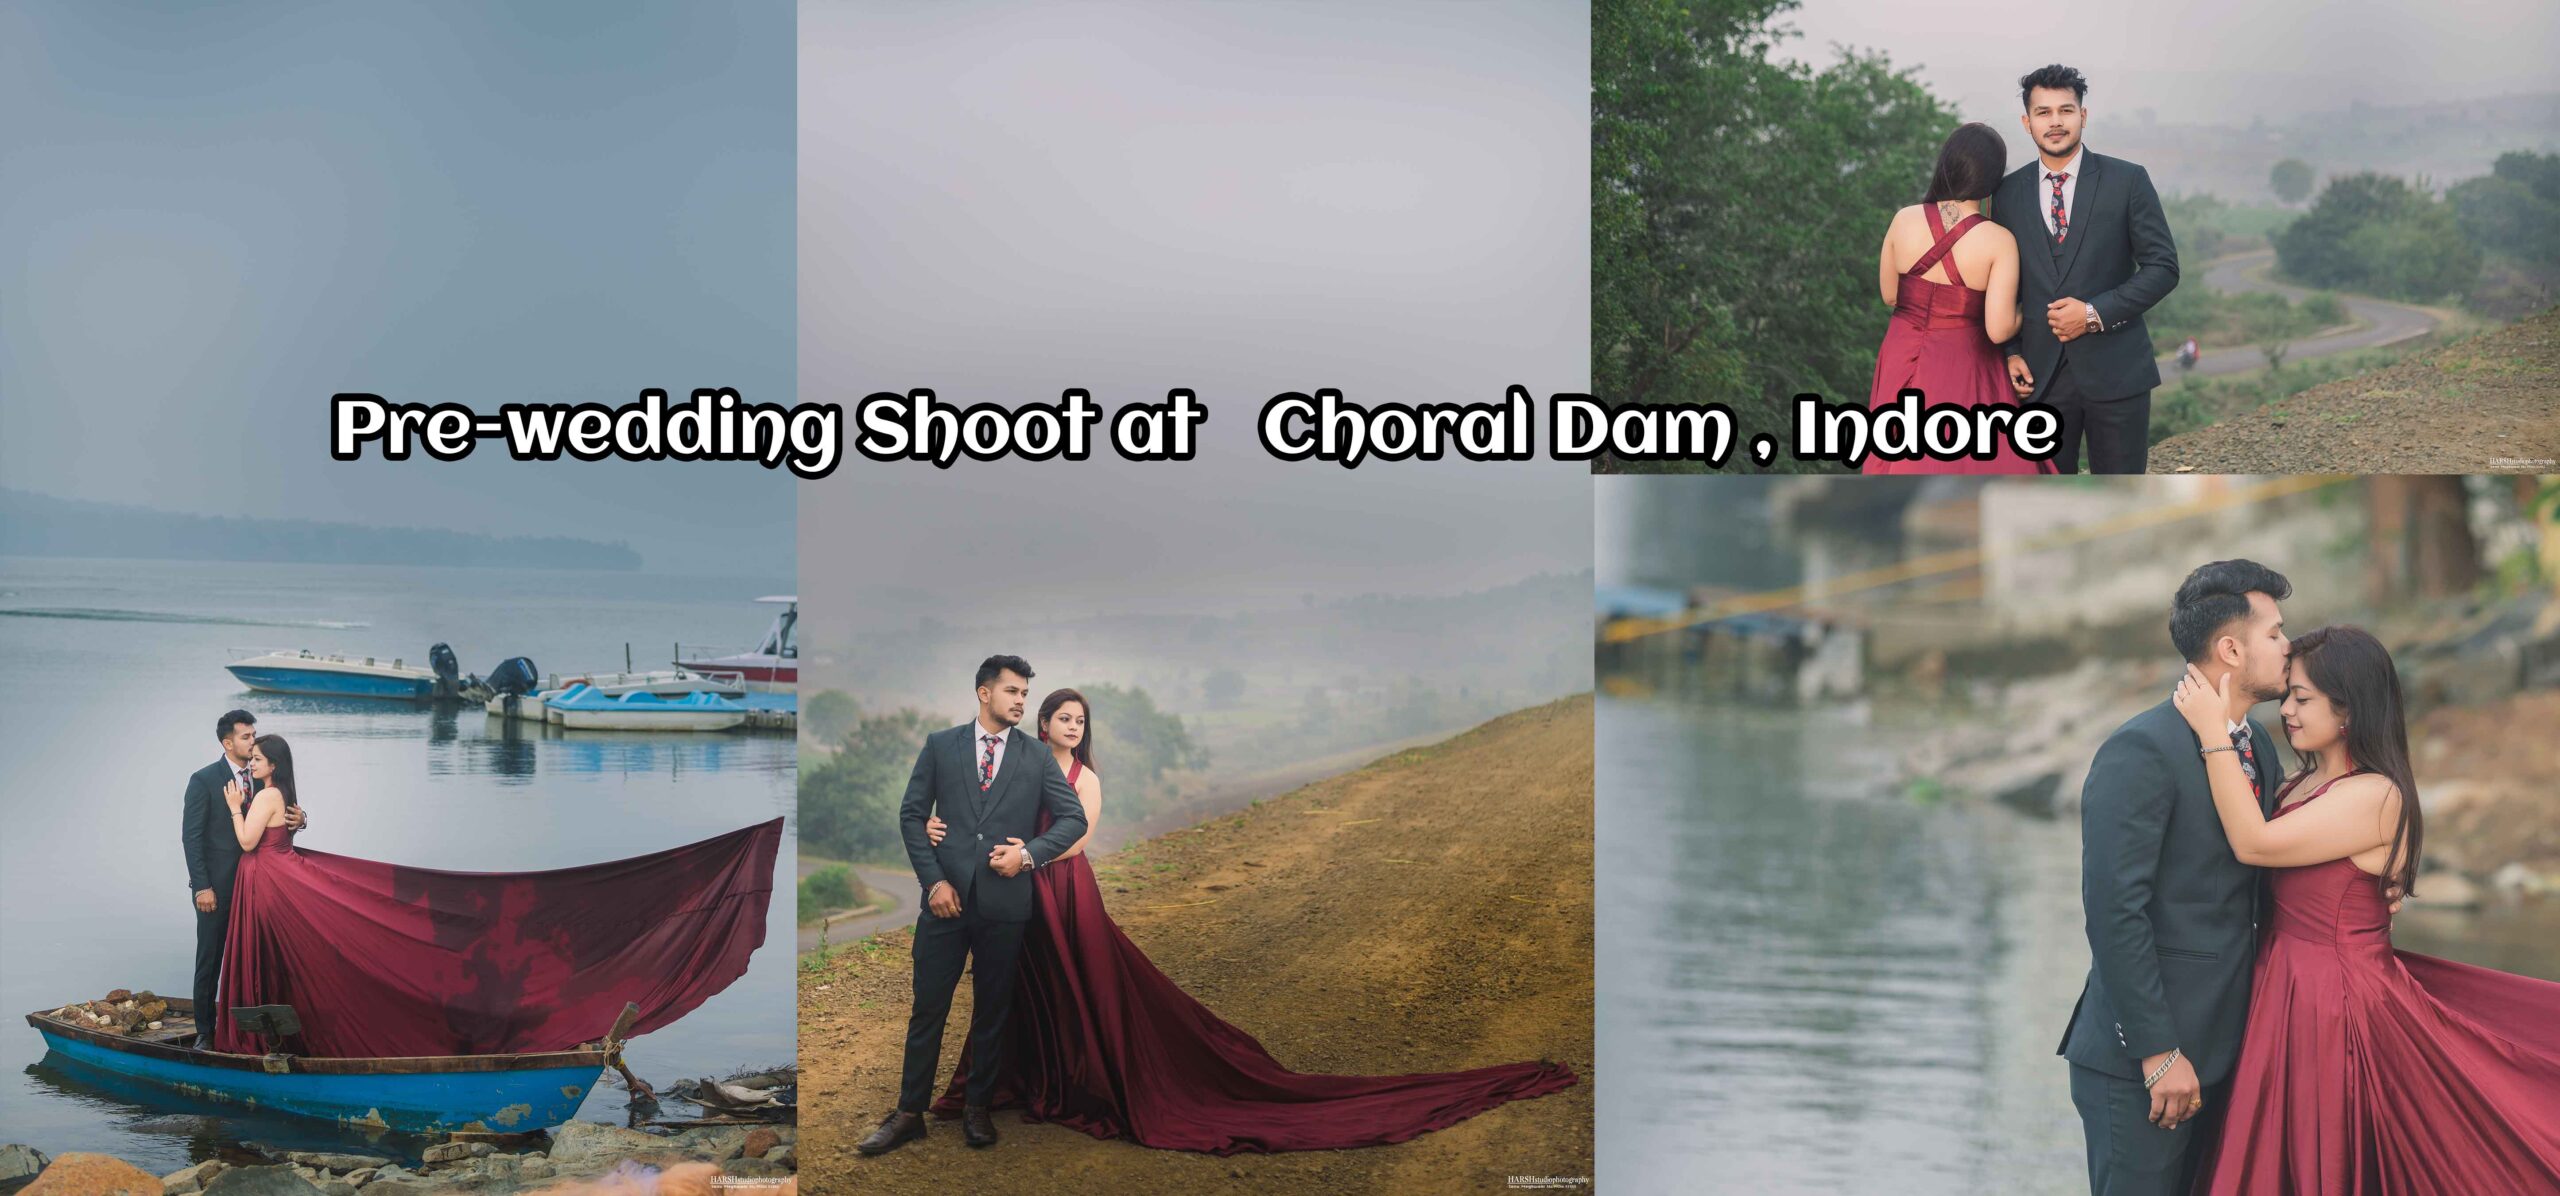 Pre-wedding shoot at Choral Resort, Indore, India, featuring a couple amidst lush greenery and serene waters, captured by Harsh Studio Photography.